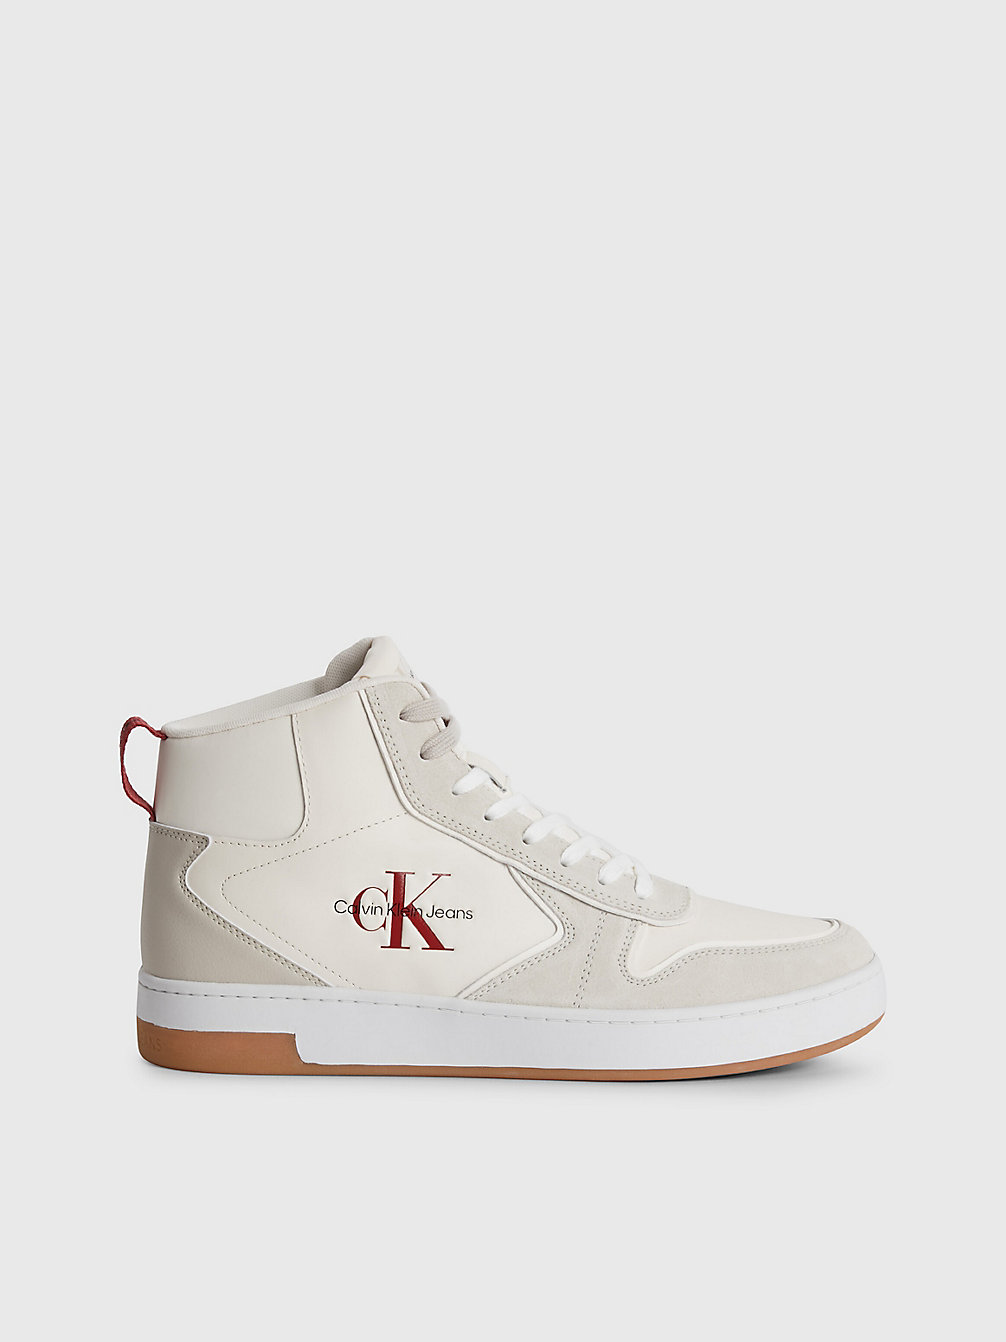 EGGSHELL/ANCIENT WHITE Leather High-Top Trainers undefined men Calvin Klein